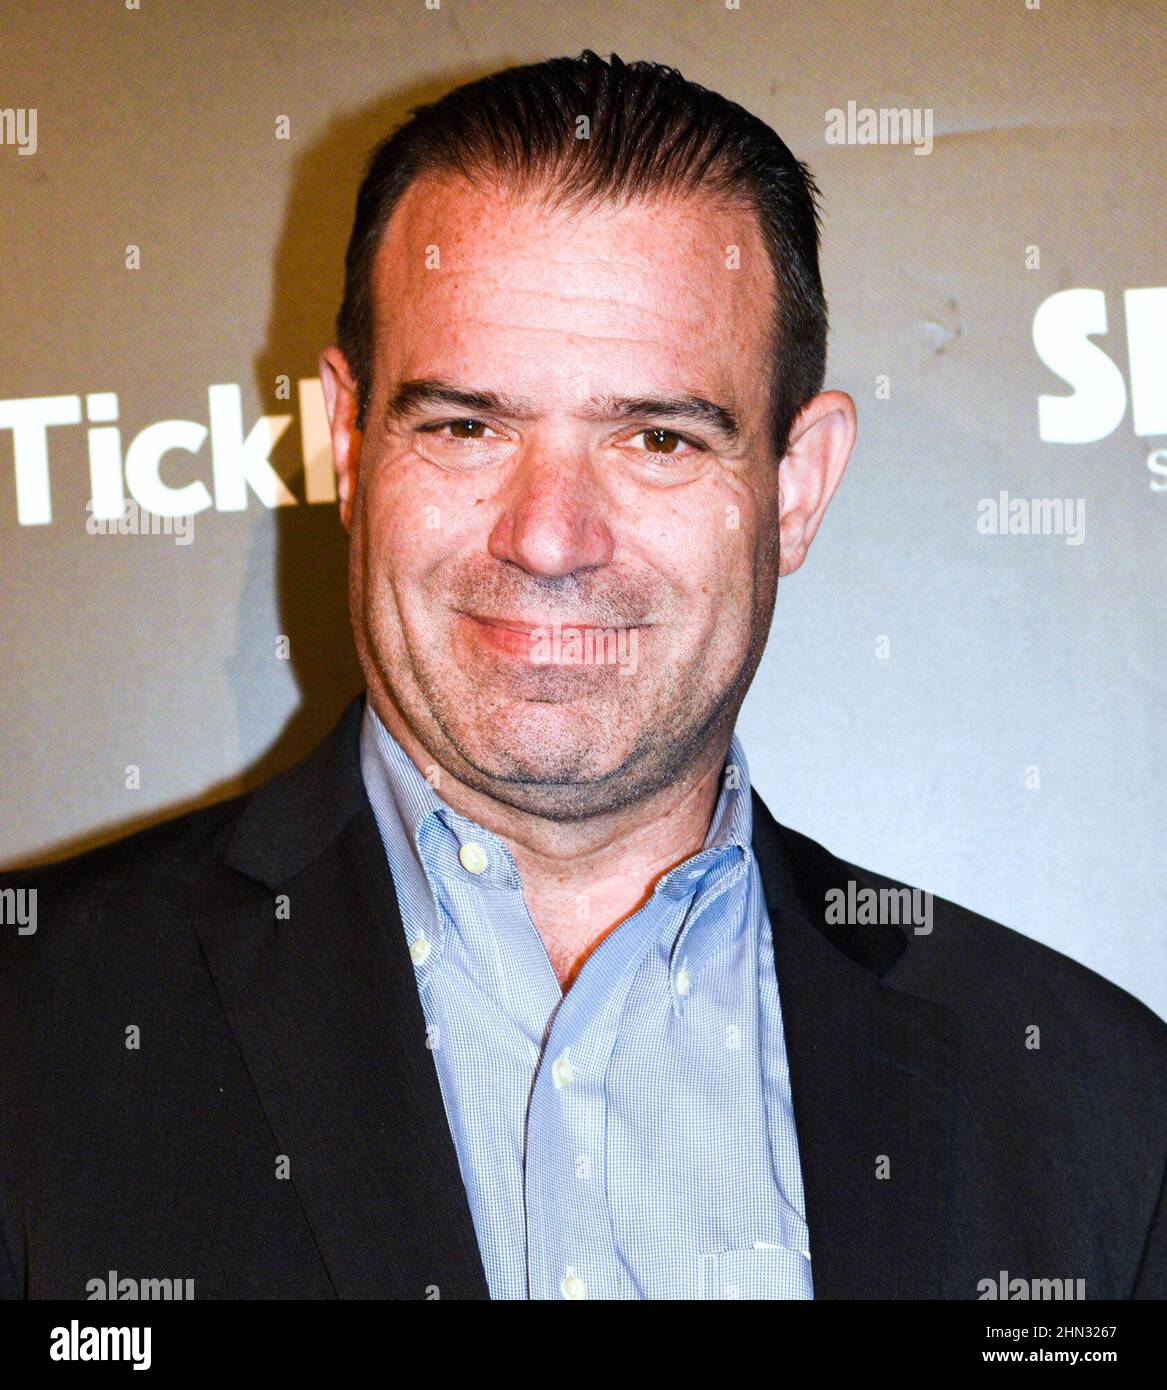 Mike Dempsey attends the DIRECTV Presents Maxim Electric Nights